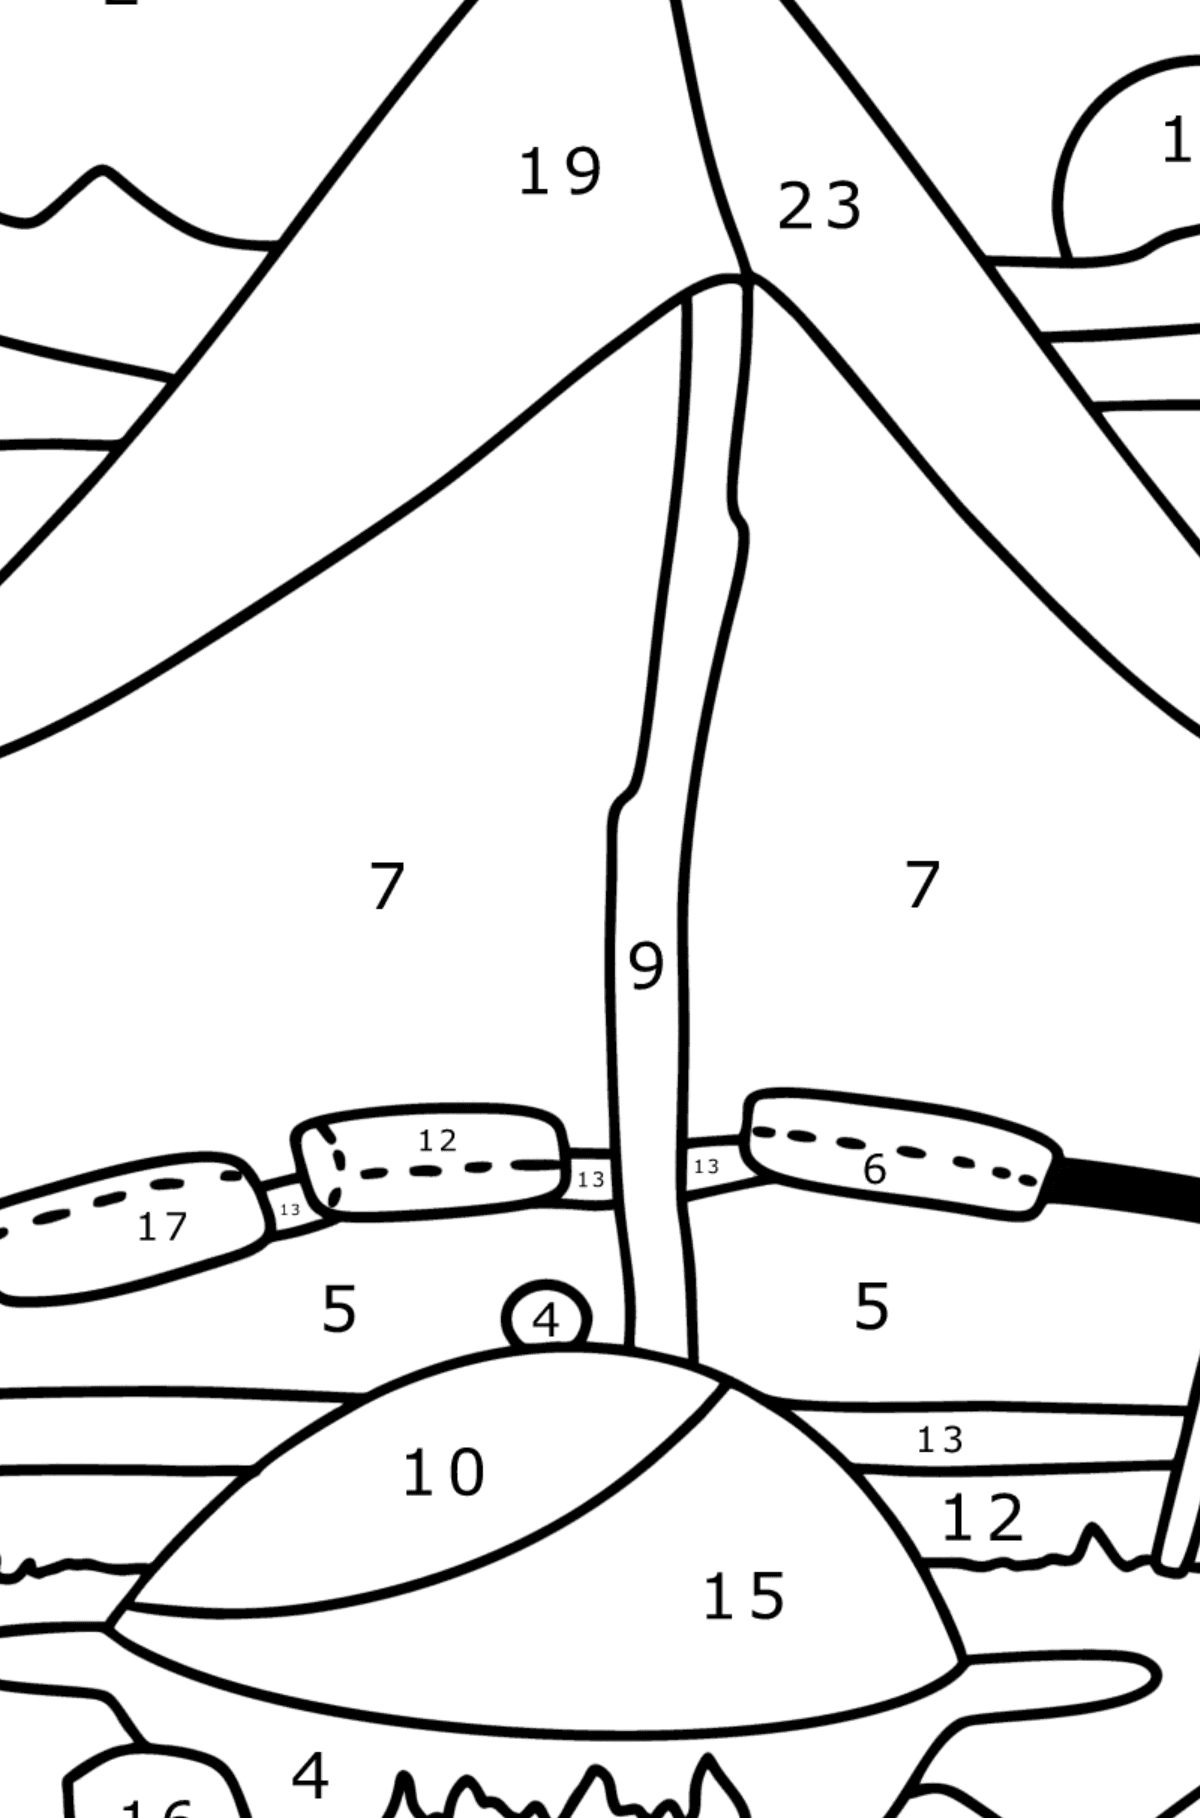 Bedouin tent coloring page - Coloring by Numbers for Kids